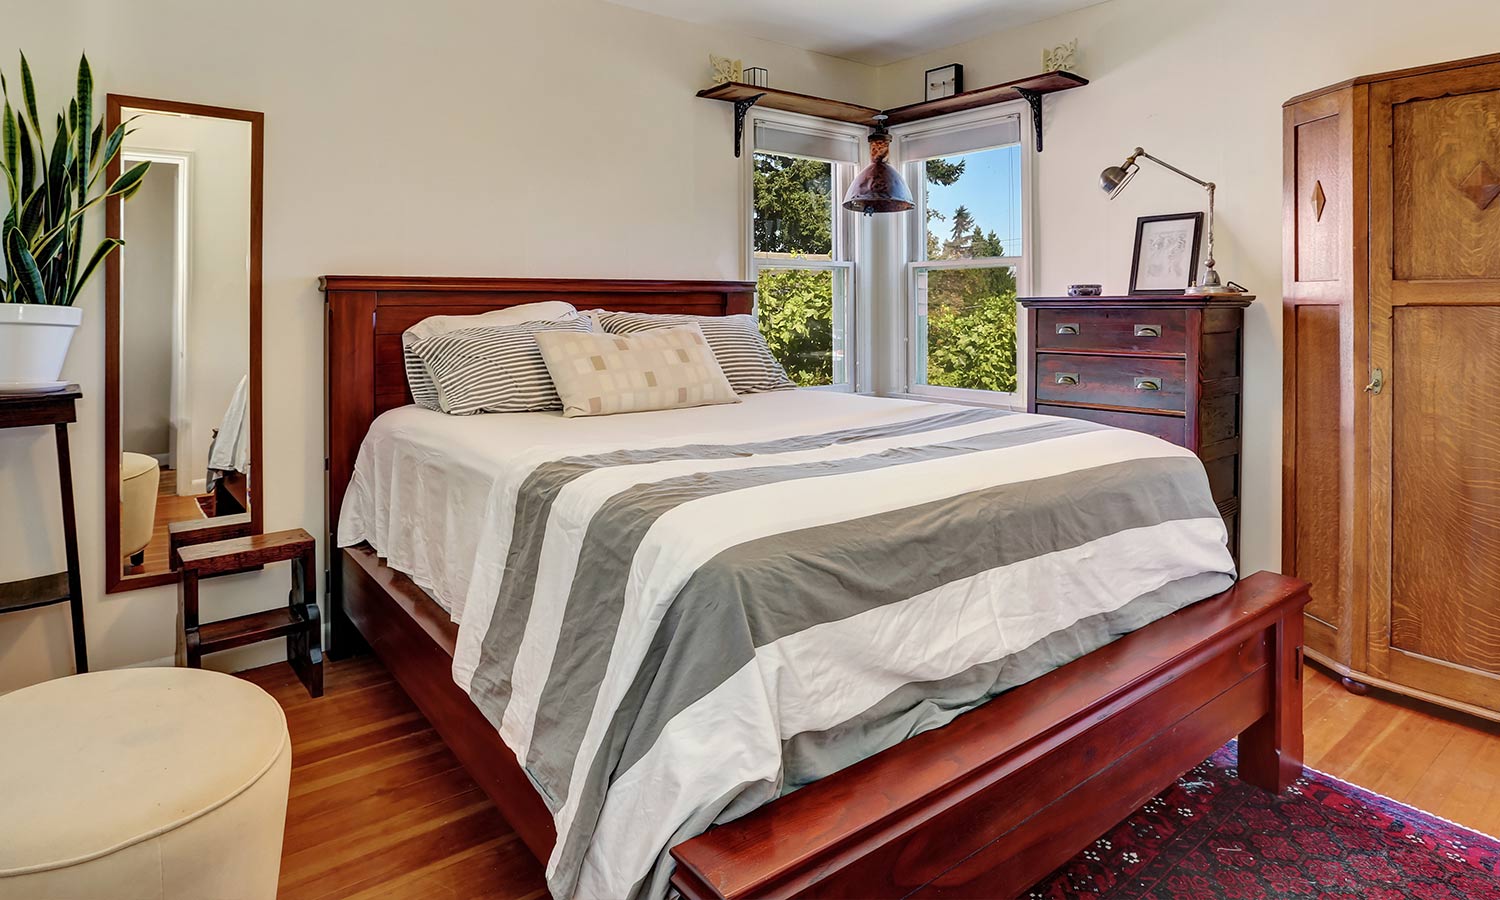 75 Diffe Types Of Beds For Every, Single Bed Frame With Headboard And Footboard